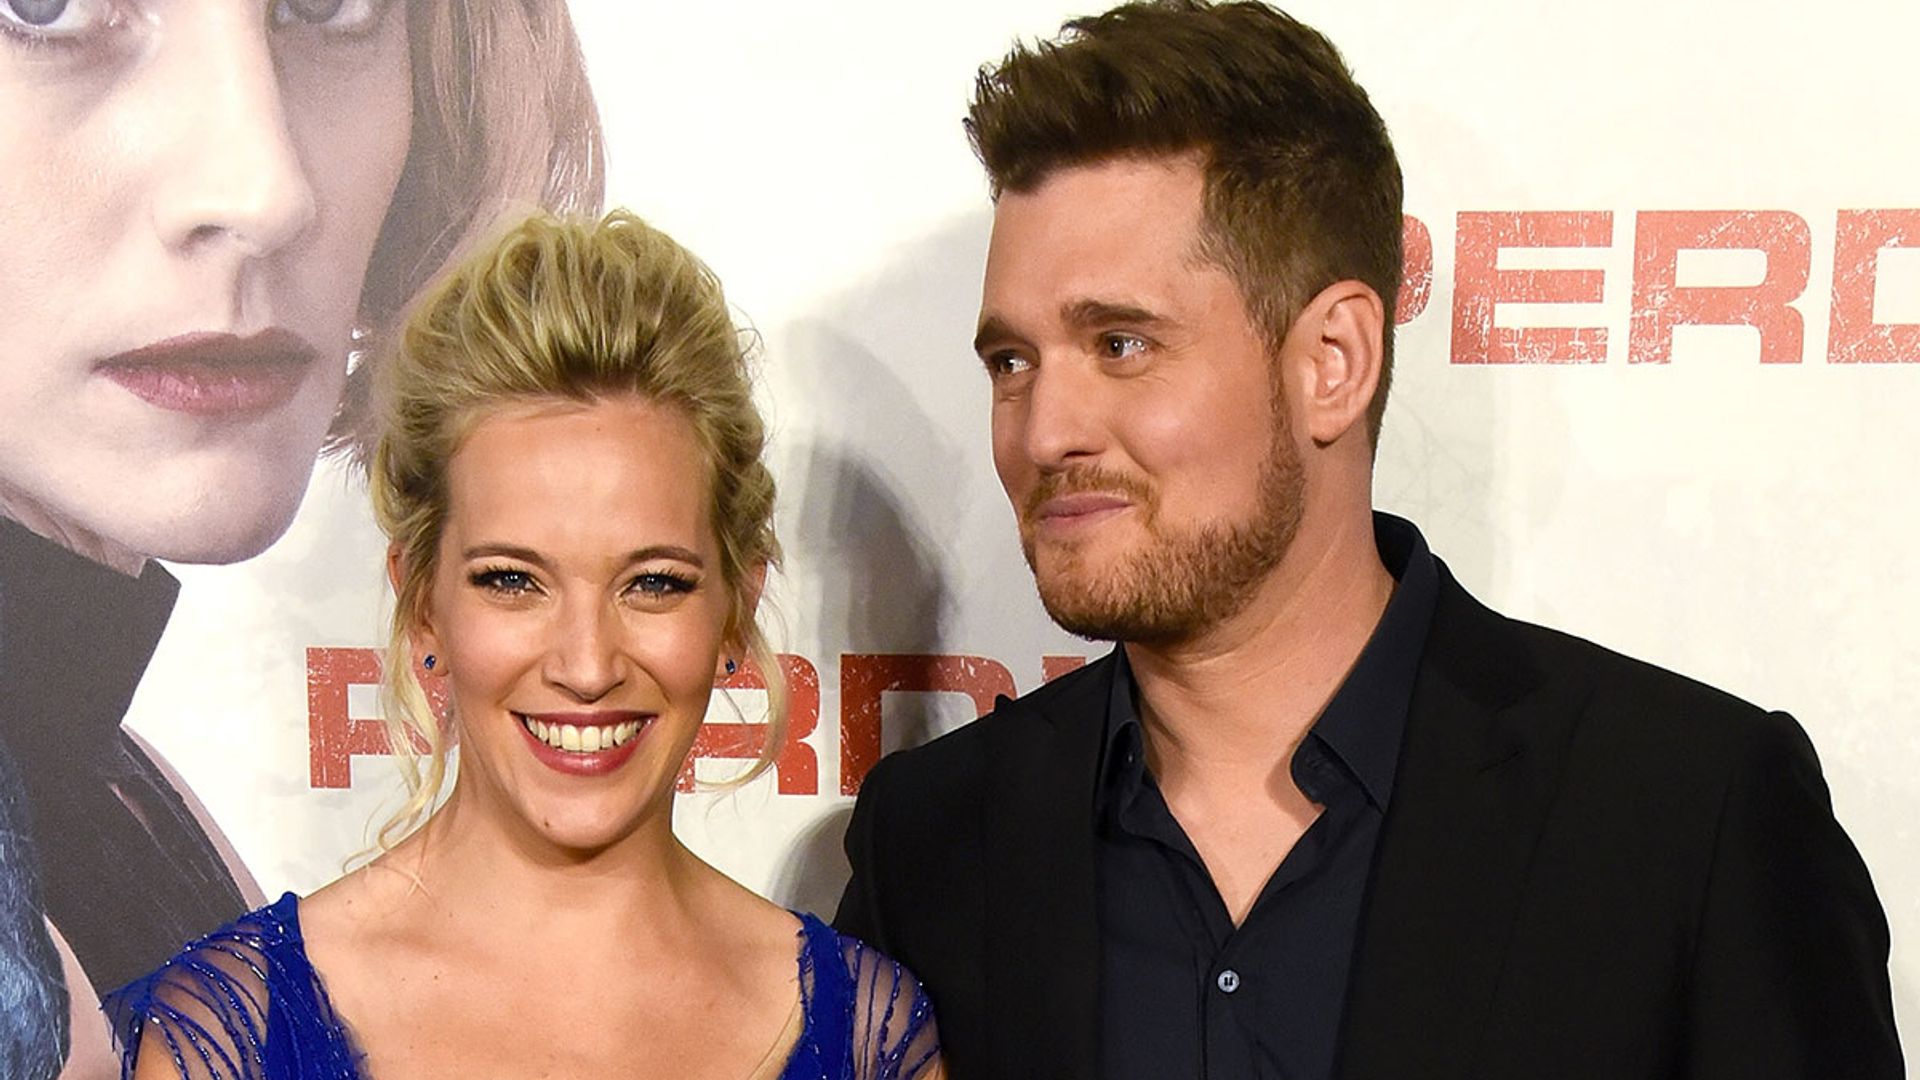 Michael Bublé kisses wife Luisana Lopilato in rare new photo for this special reason